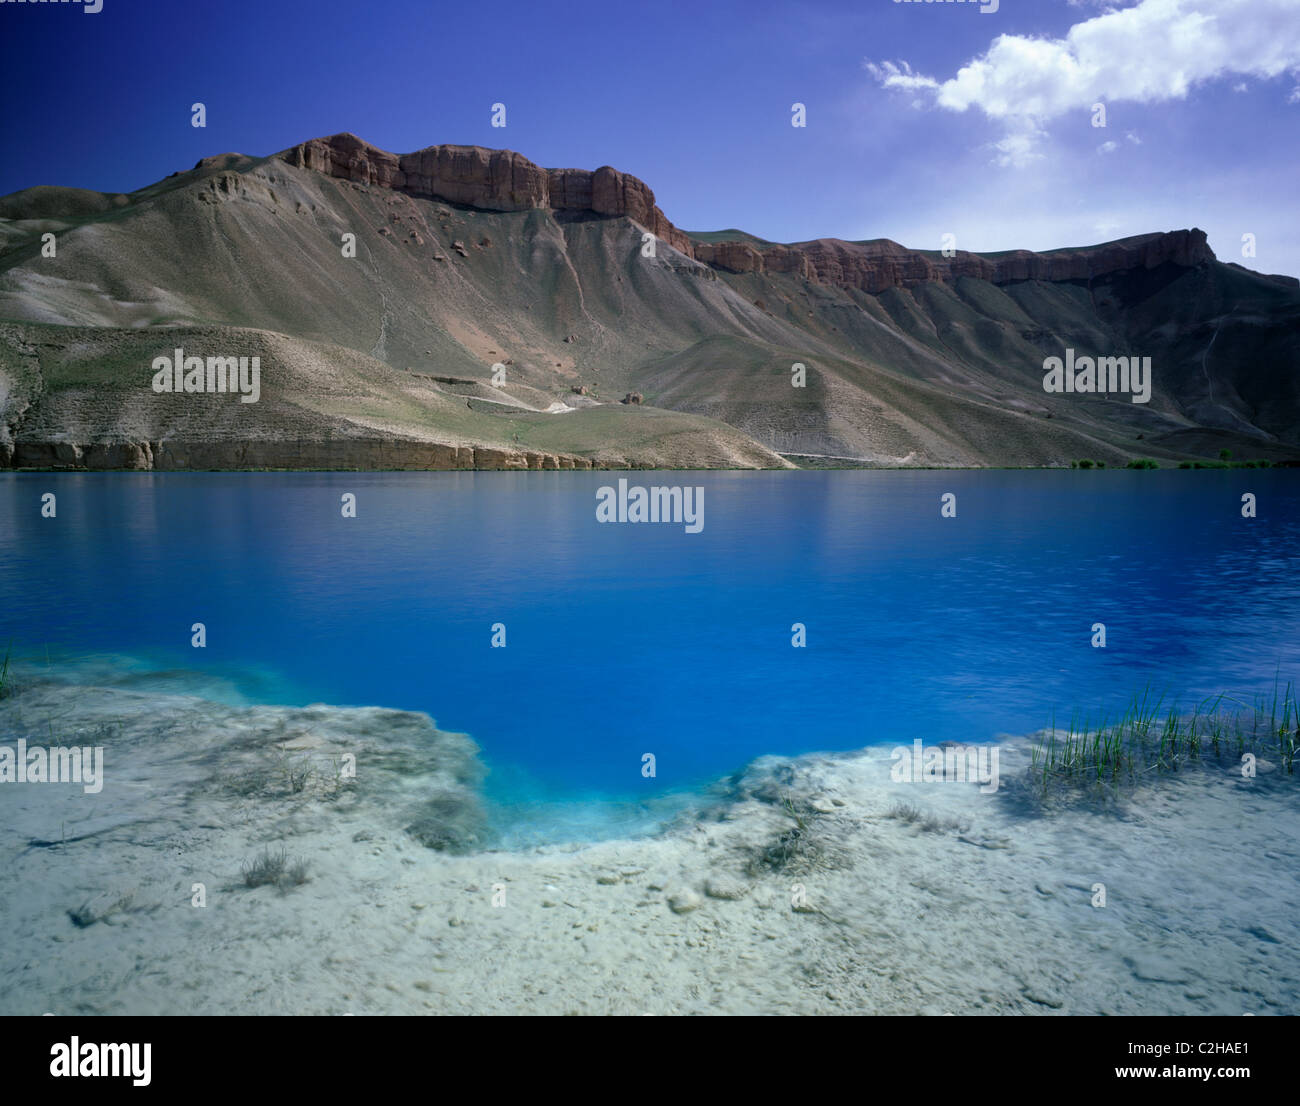 Band-e Amir (Persian meaning Dam of the Amir) refers to five lakes high in the Hindu Kush Mountains near the famous Buddhas of Stock Photo